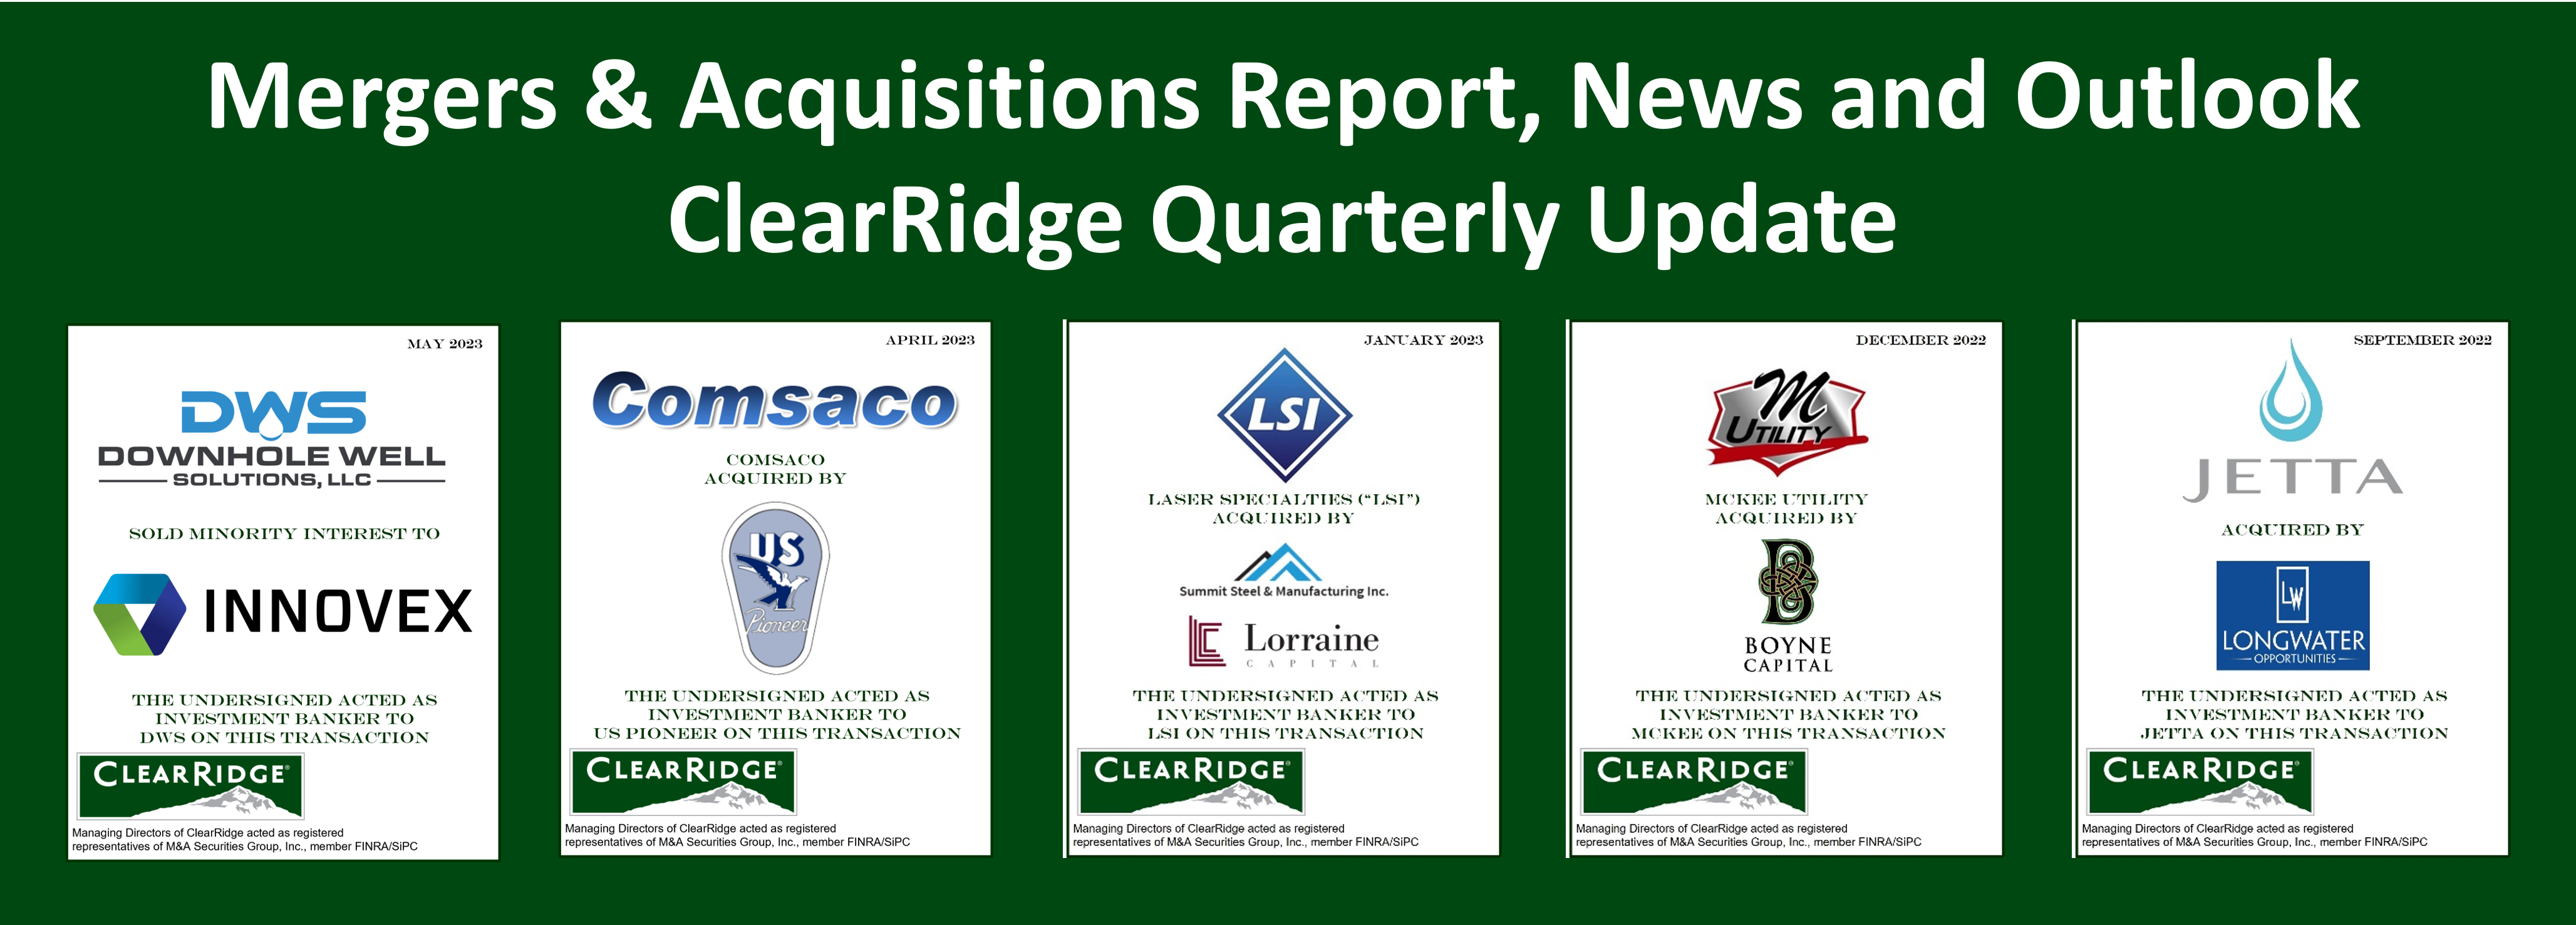 Mergers & Acquisitions Report